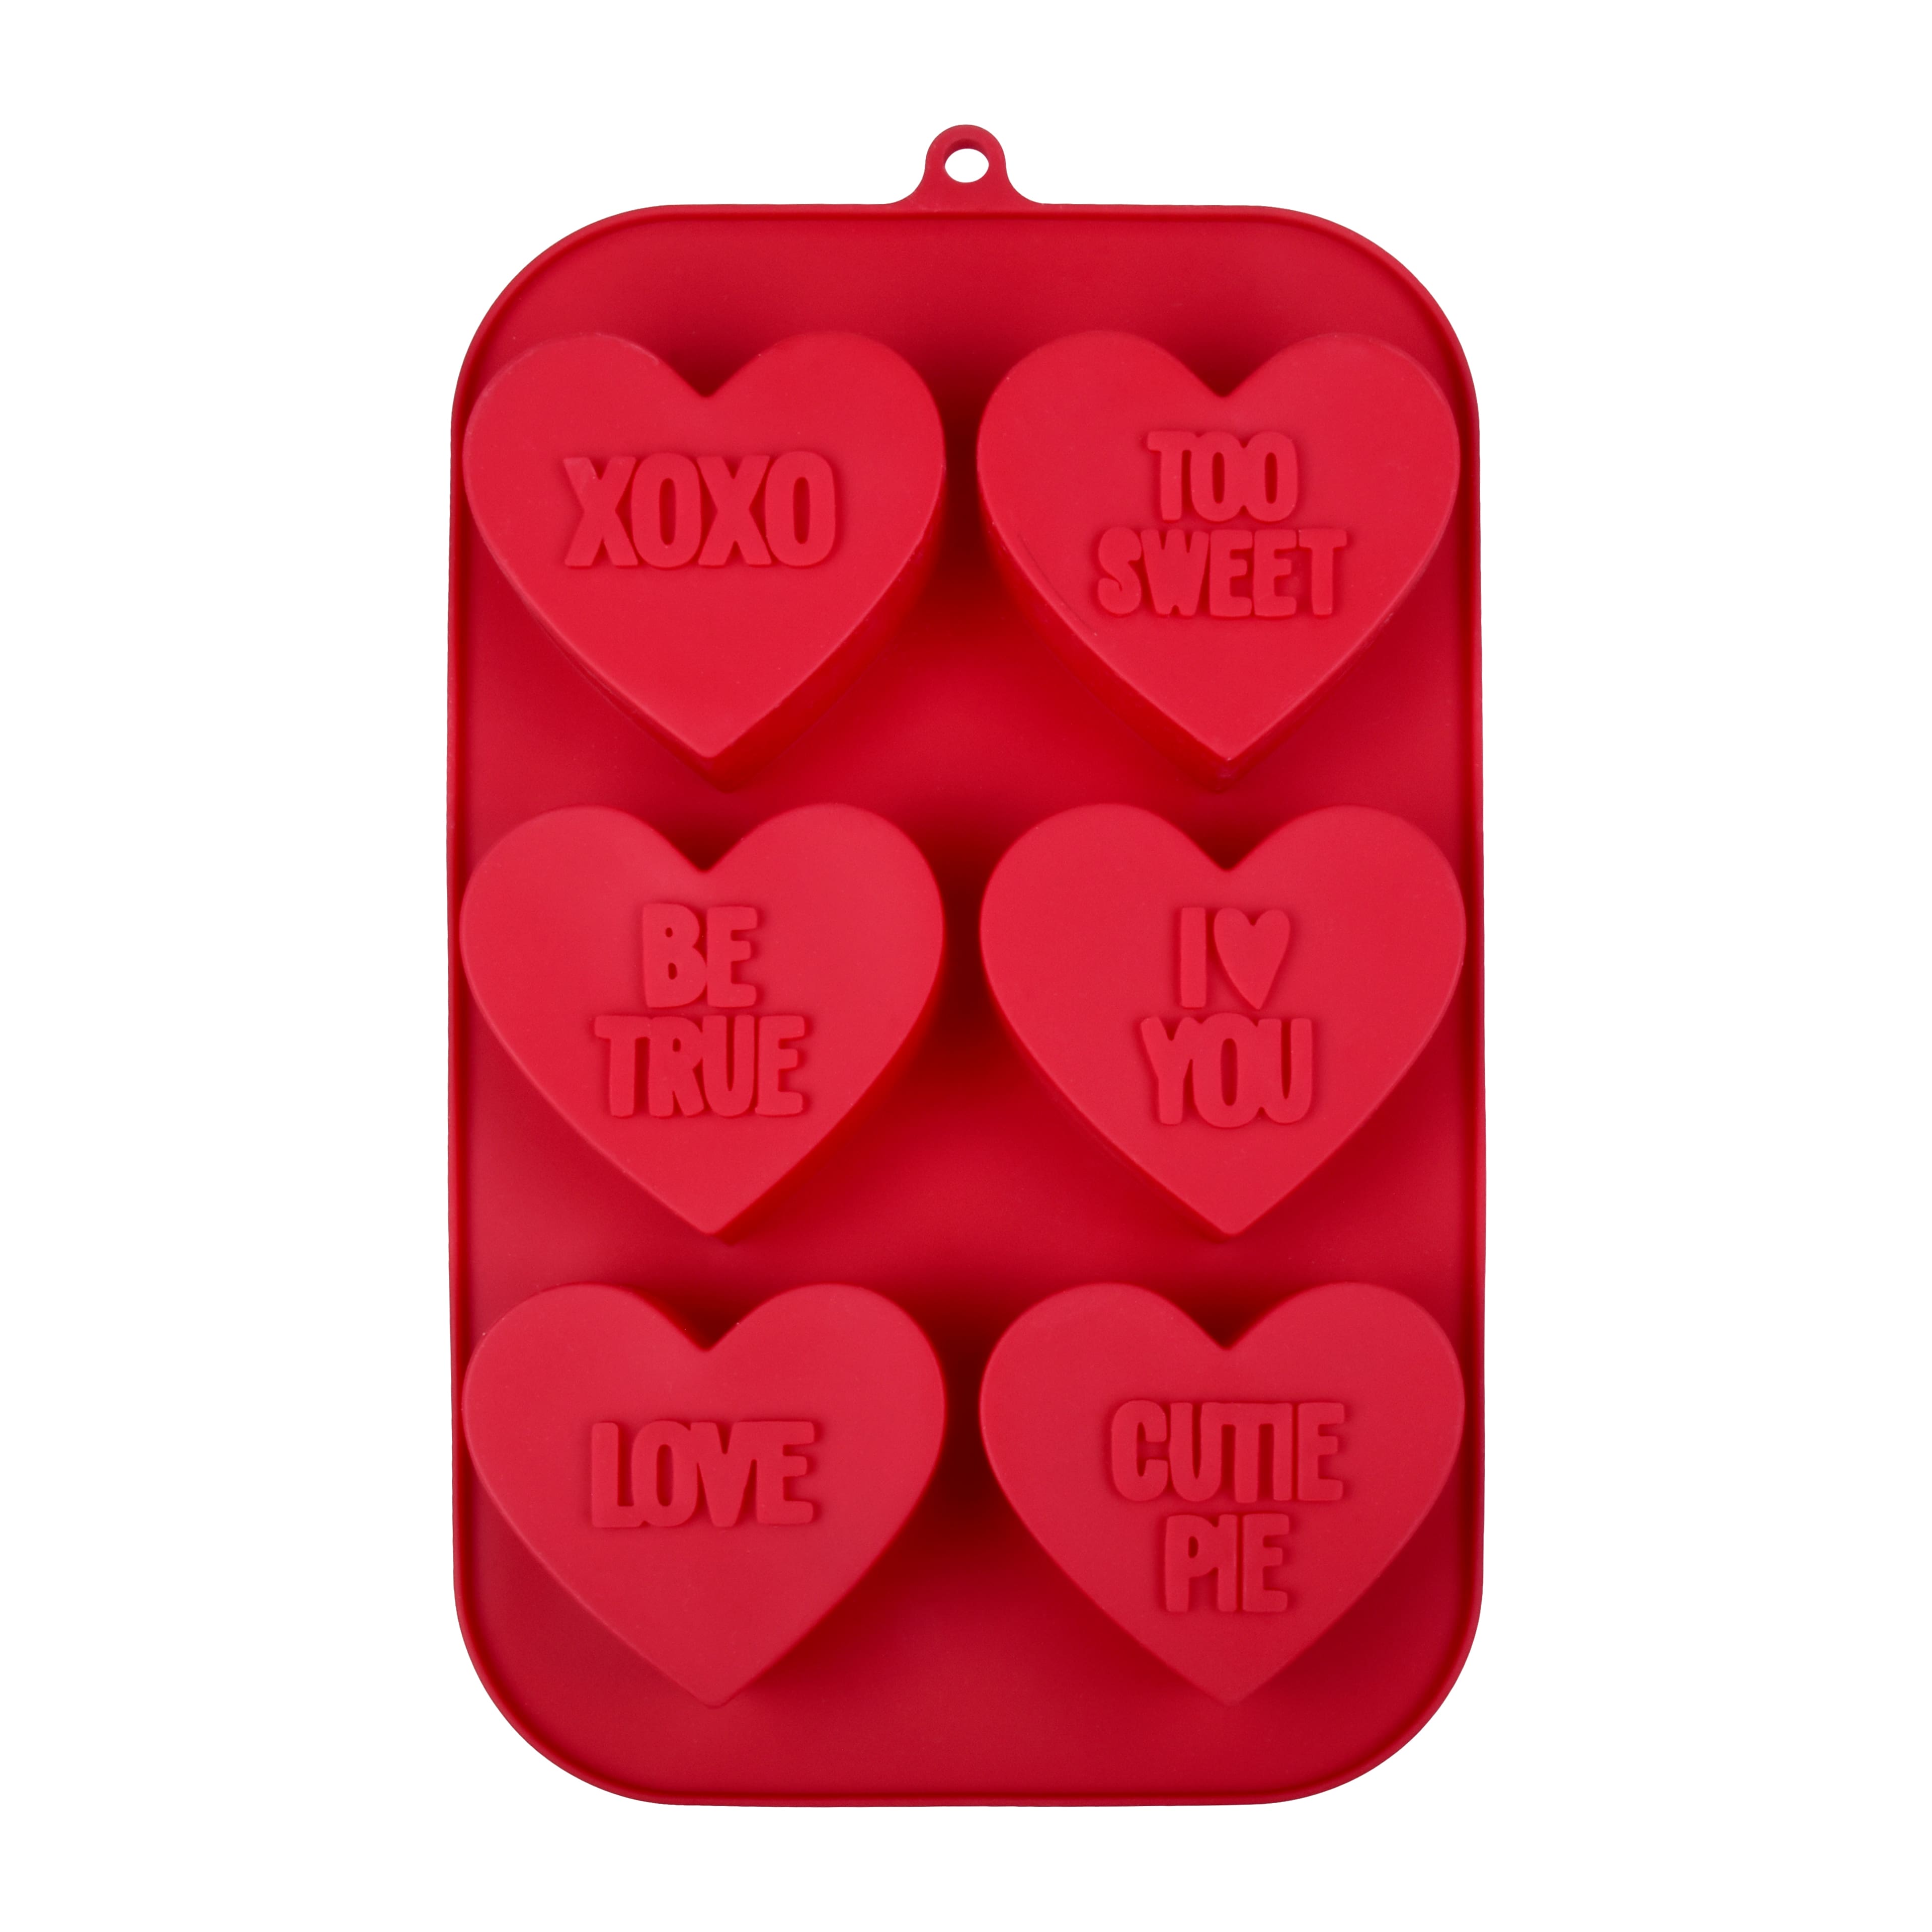 HEART WITH MESSAGES Silicone Mold - Heaven's Sweetness Shop